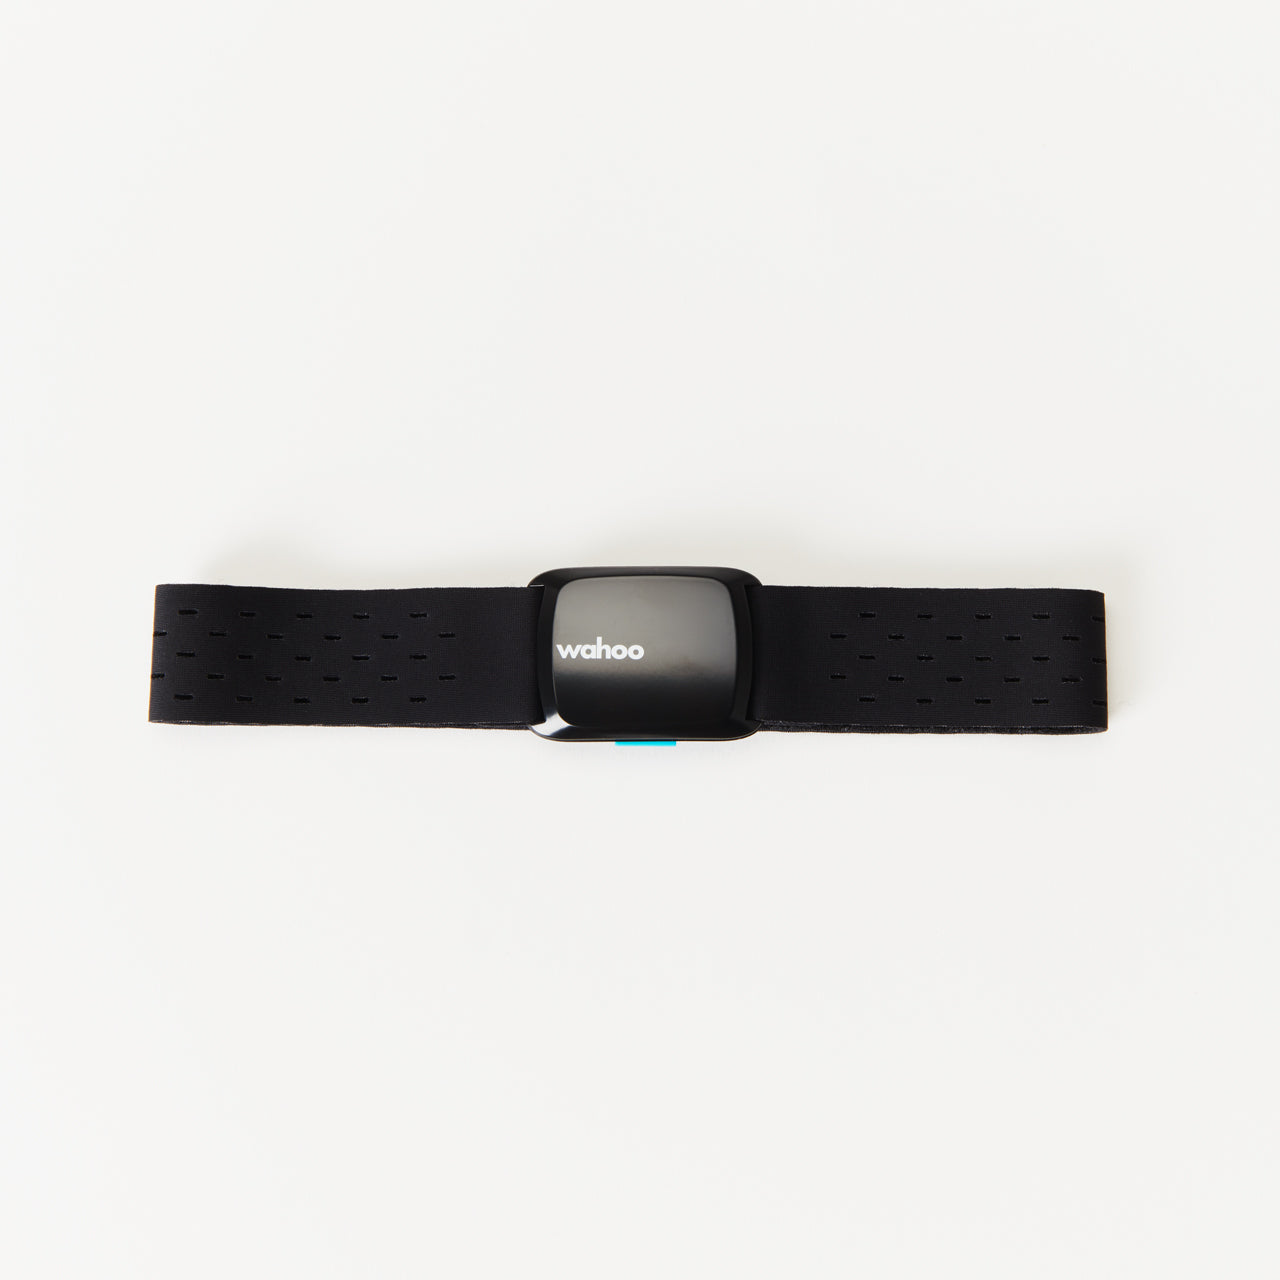 Wahoo TICKR FIT Armband Heart Rate Monitor